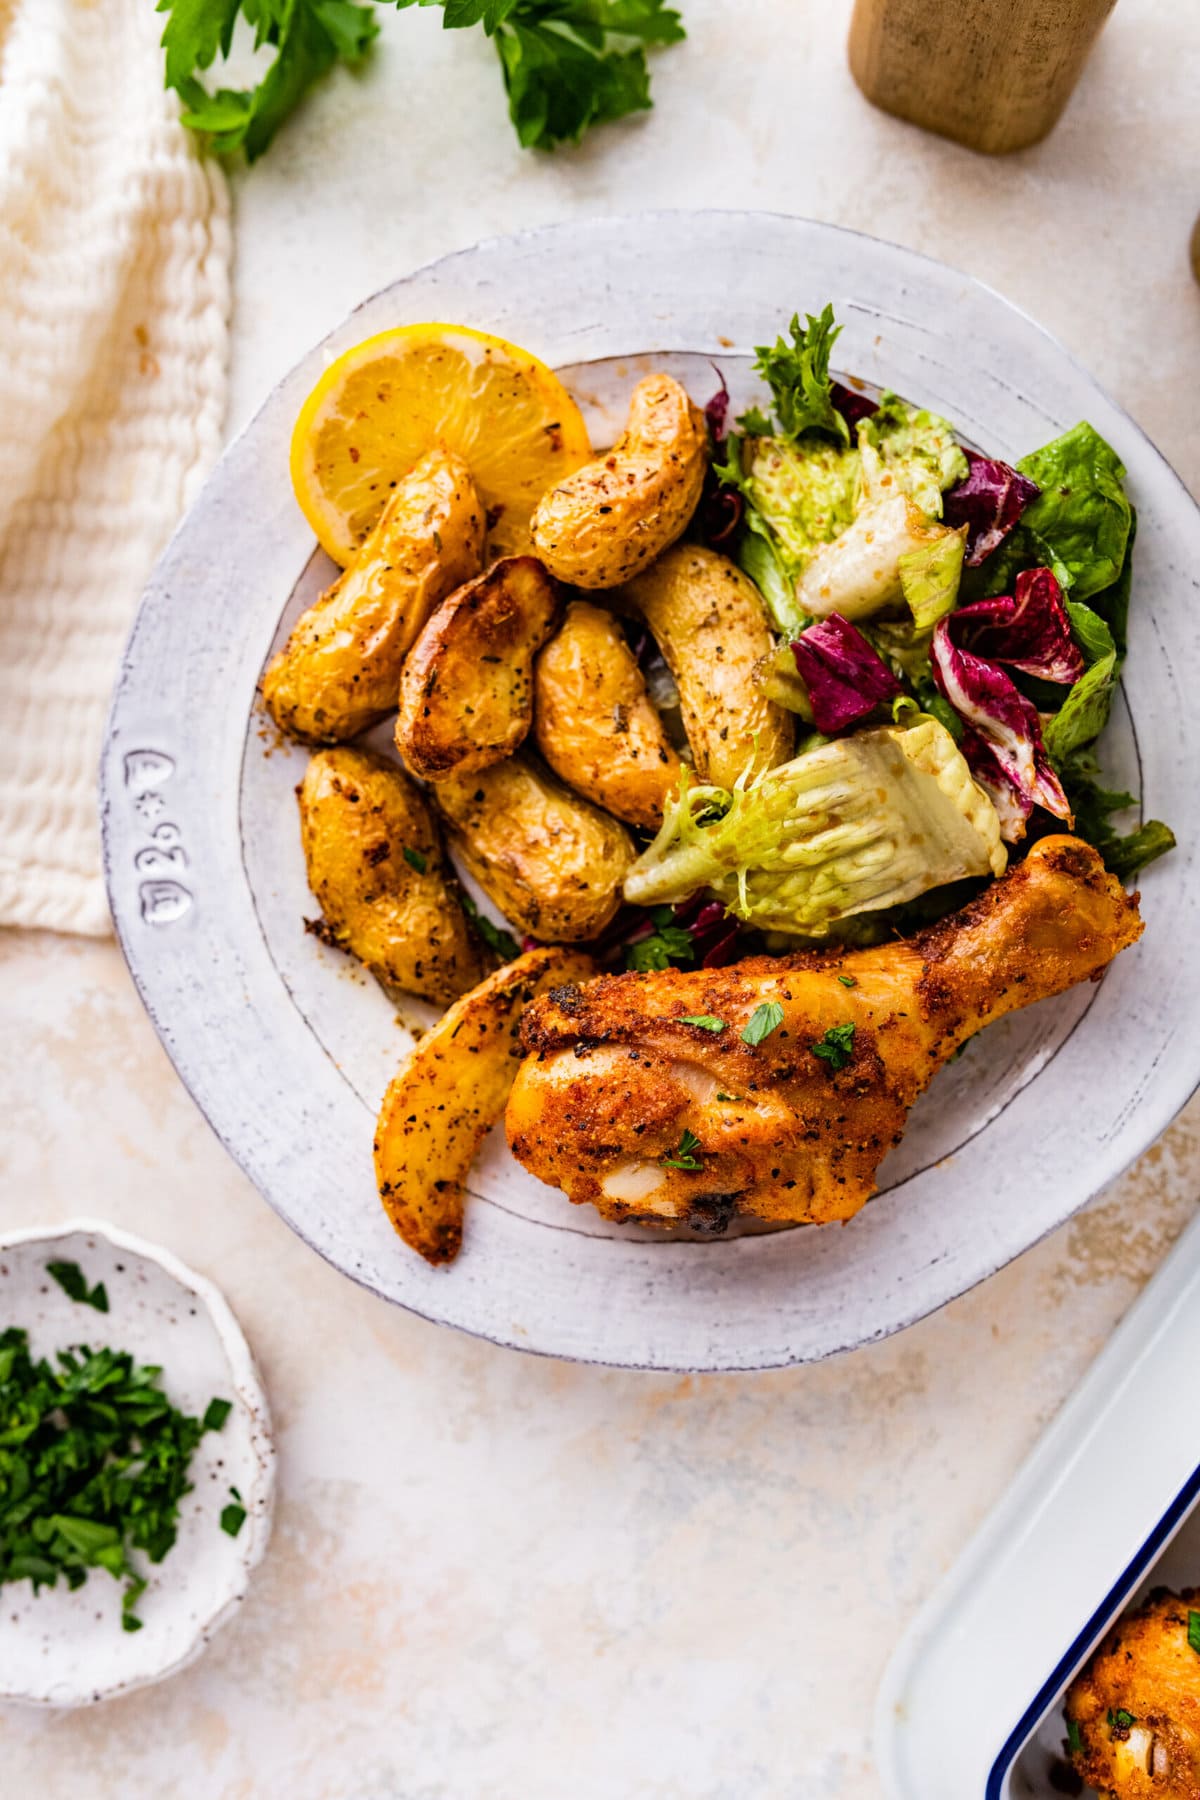 white plate with baked chicken drumstick with potatoes and salad.